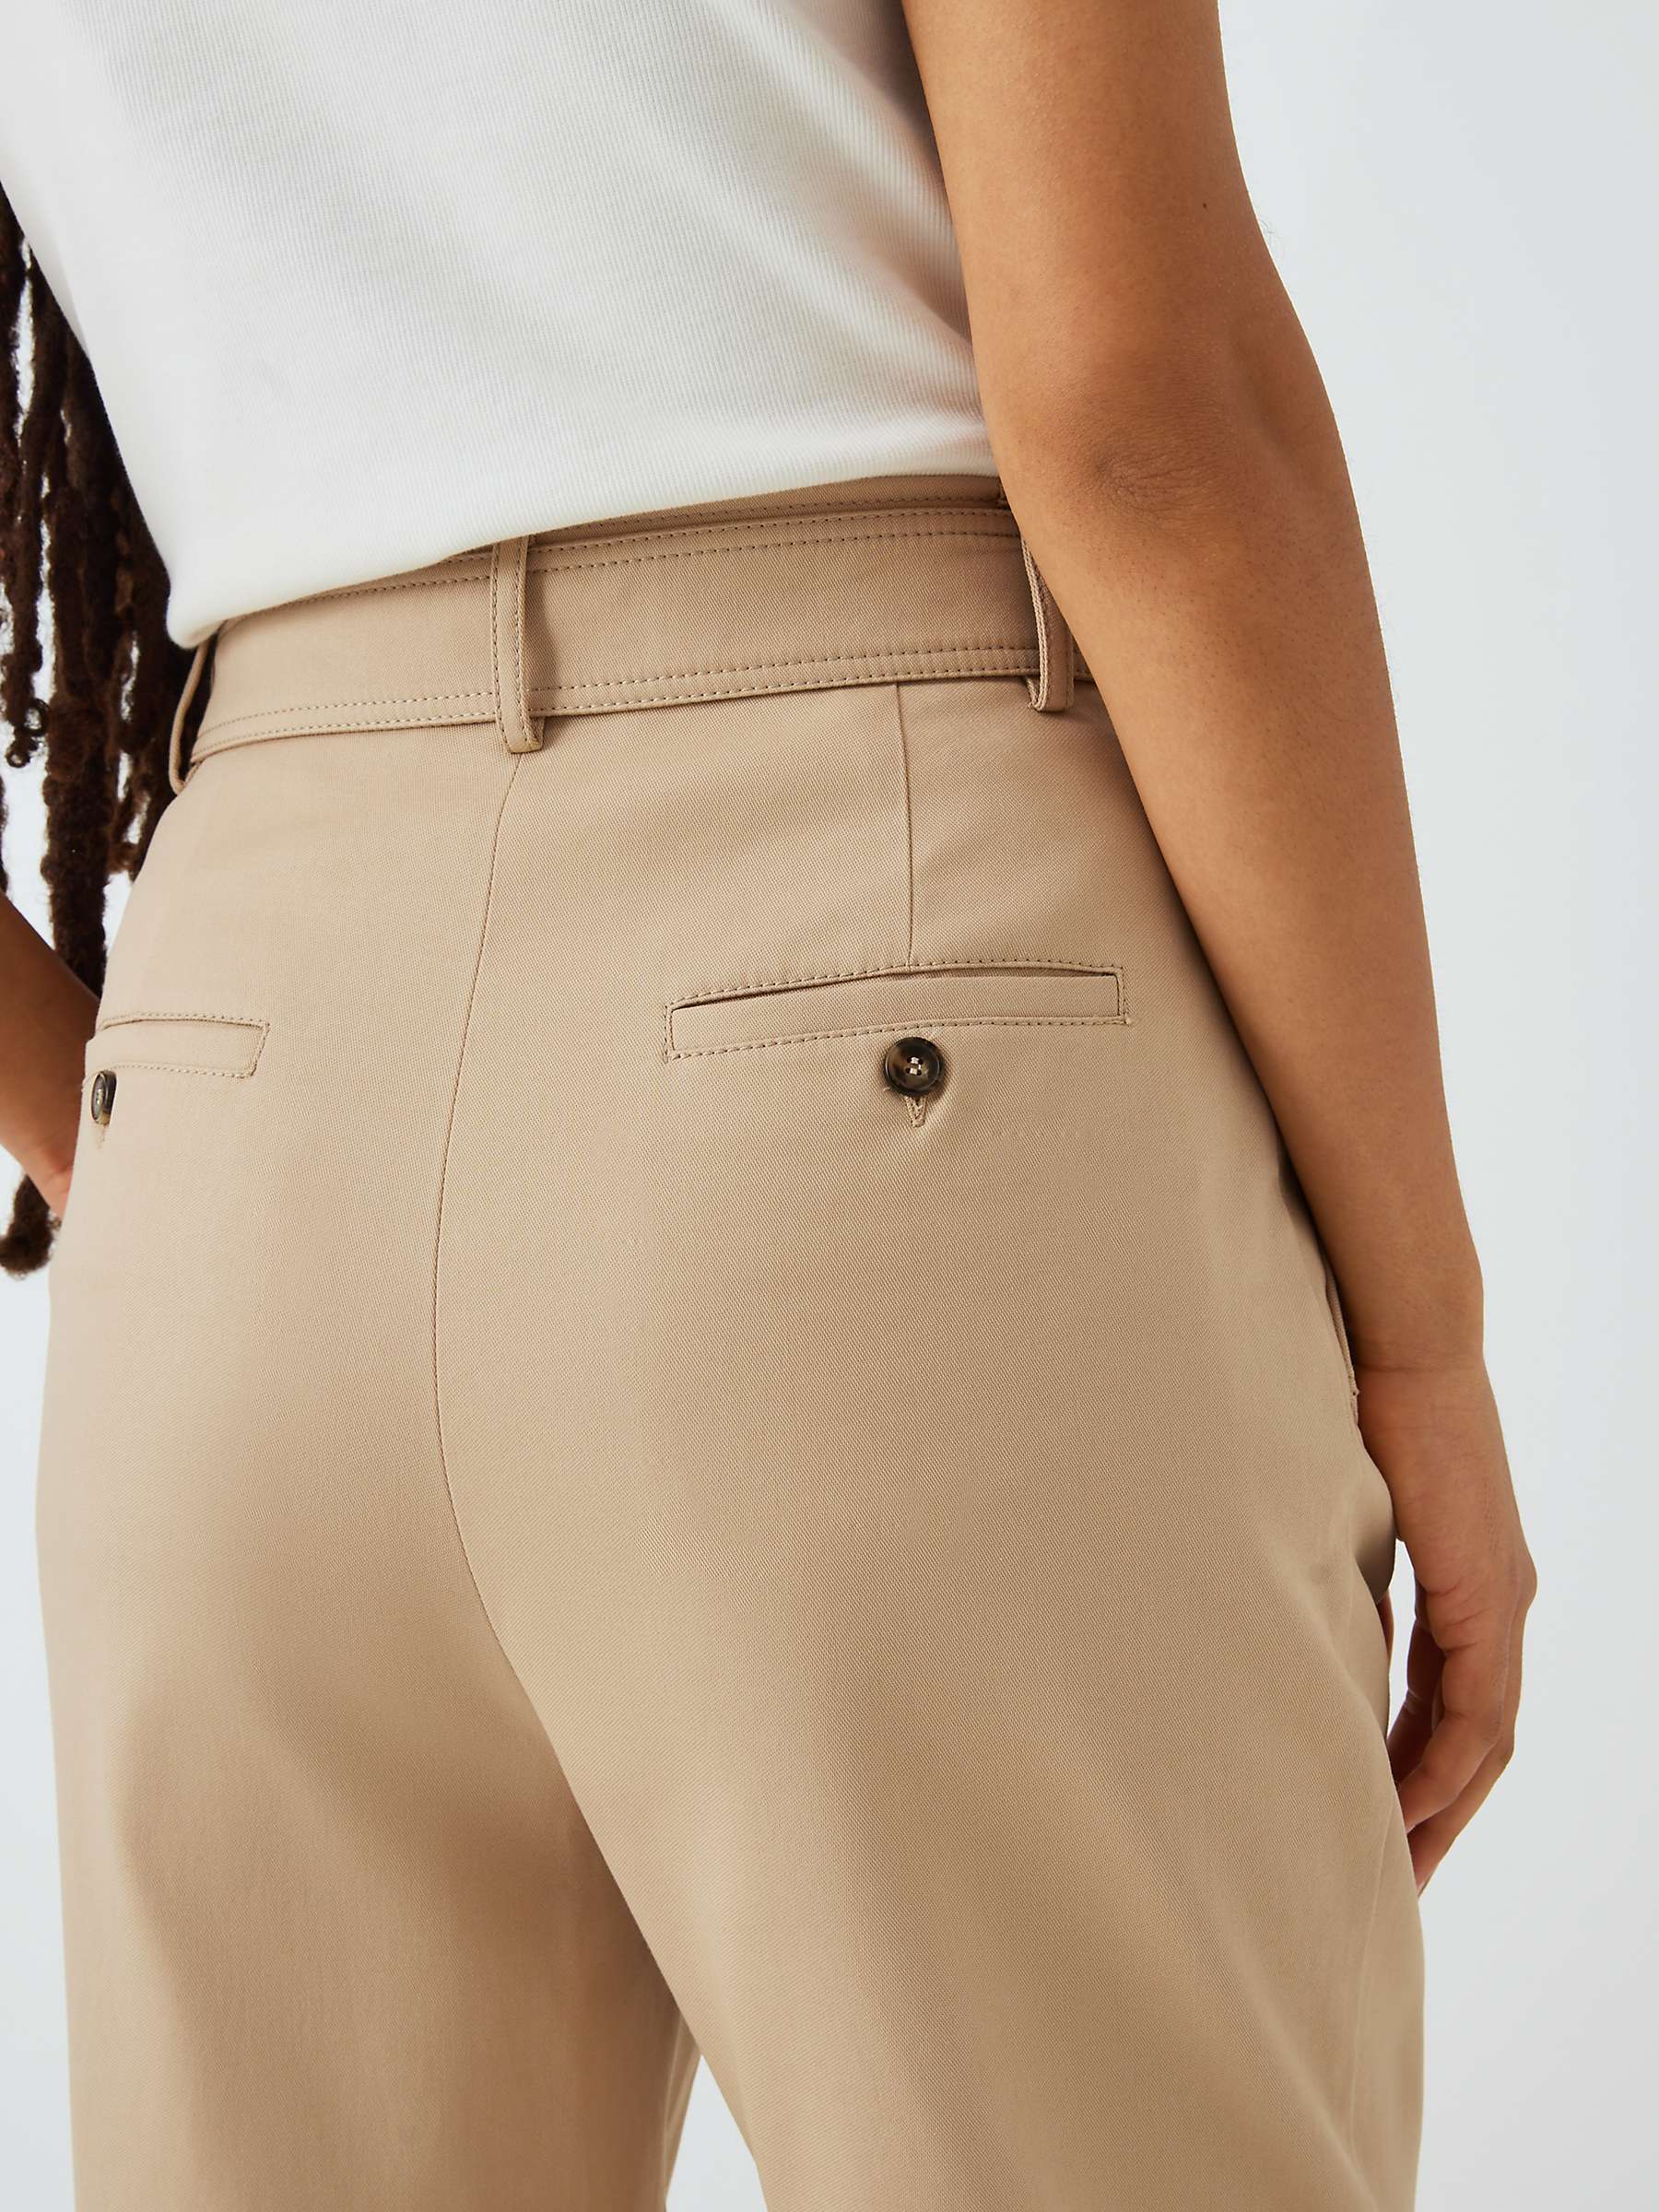 Buy Weekend MaxMara Occ High Rise Belted Trousers, Sand Online at johnlewis.com